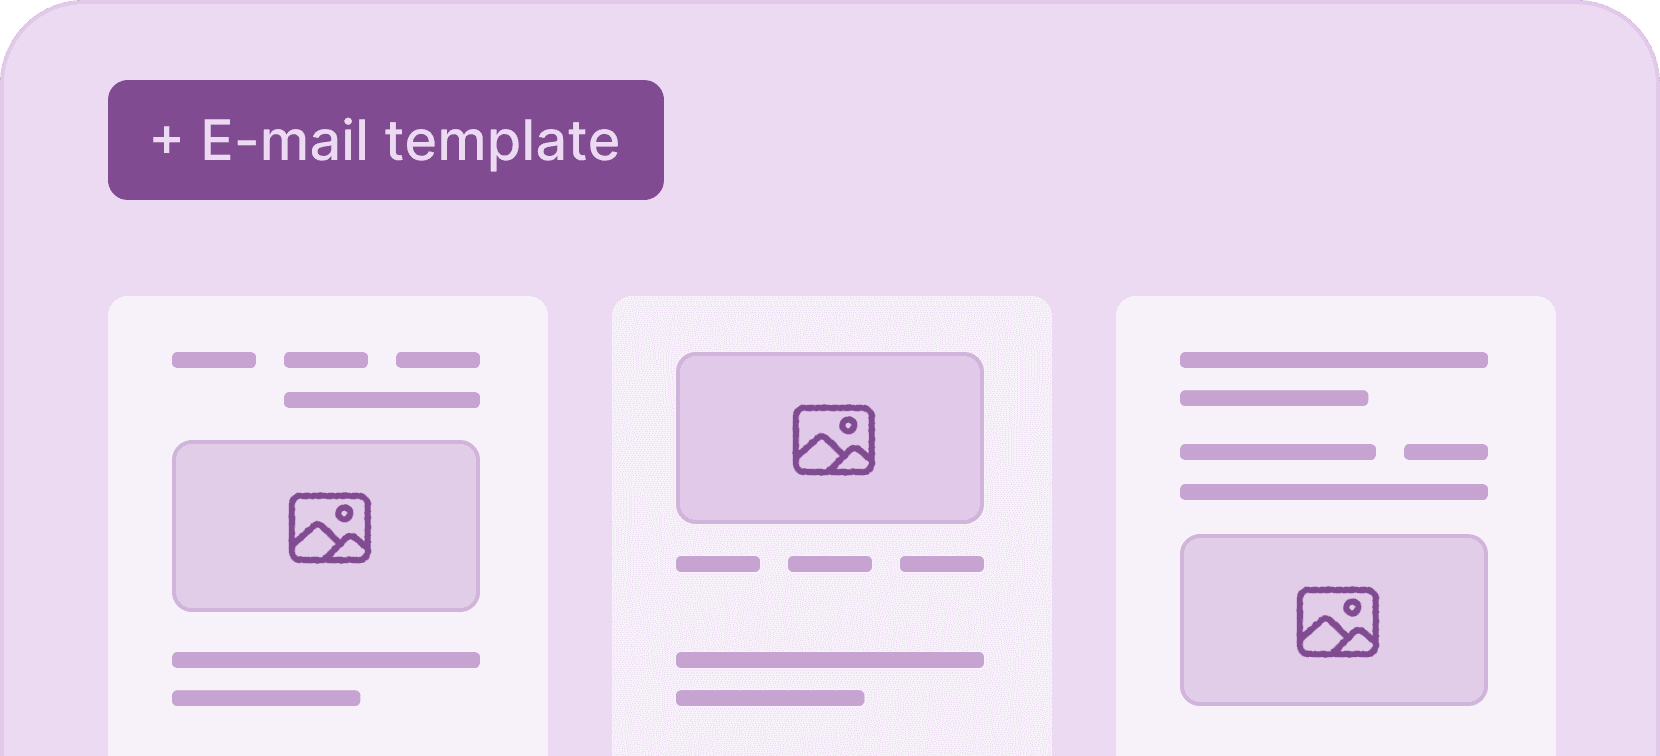 Choose from multiple email templates - Certifier features